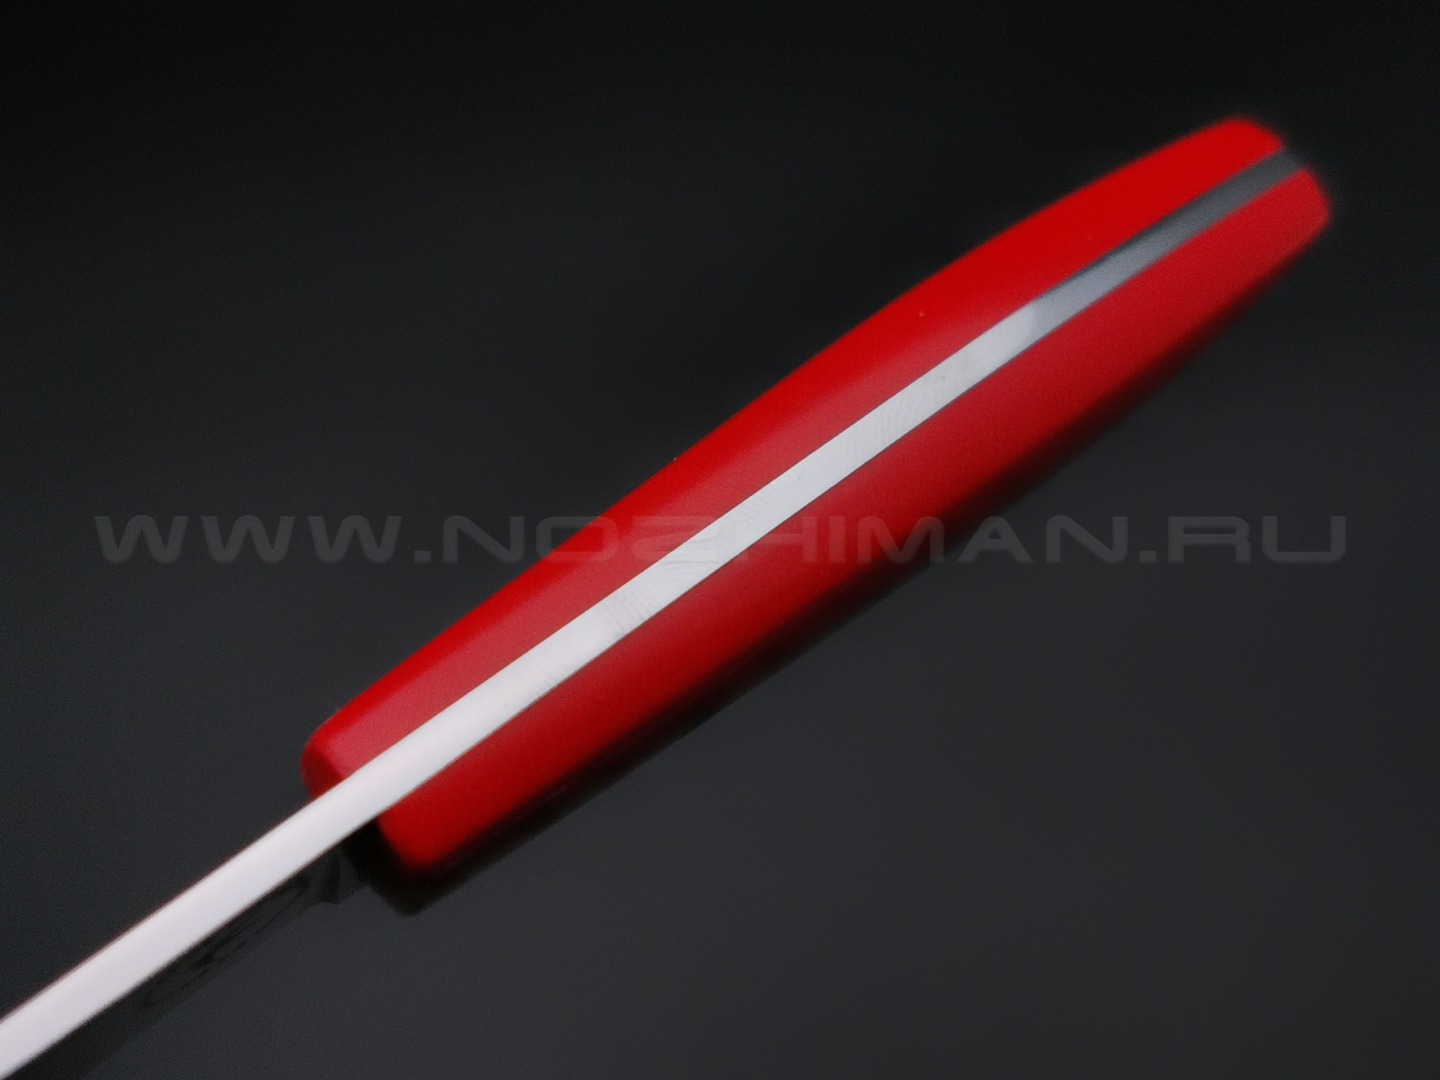 Apus Knives нож Toothpick сталь N690, рукоять G10 red